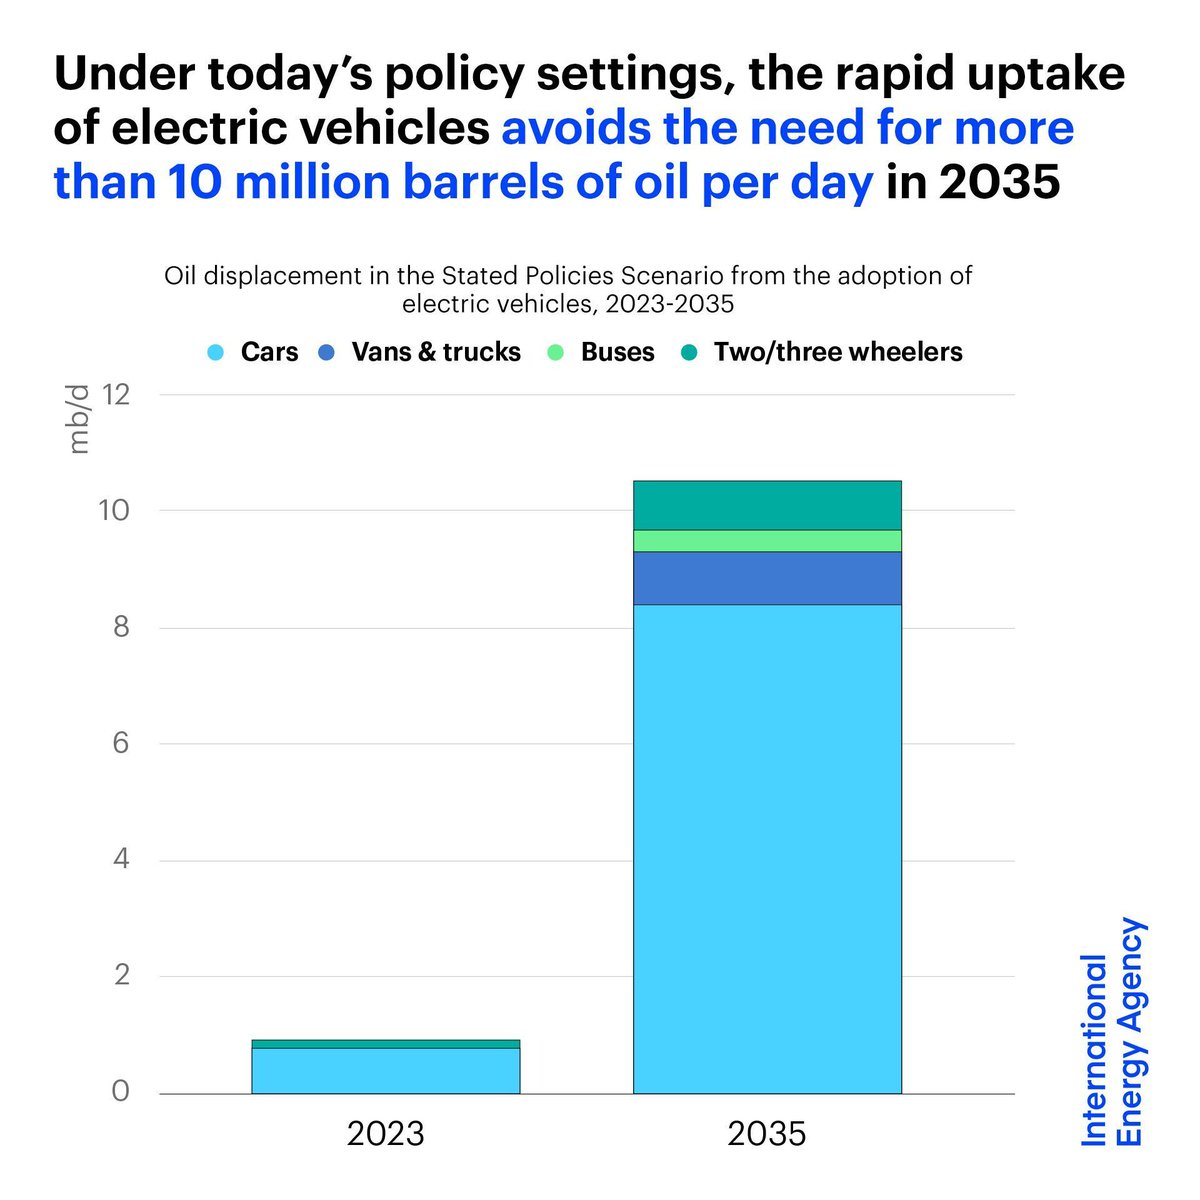 Under today’s policy settings, the uptake of EVs – including cars, vans, trucks, buses & 2/3-wheelers – is set to avoid the need for over 10 million barrels of oil a day in 2035 That's equal to all the oil demand from road transport in the US today 👉 iea.li/4beWVnU